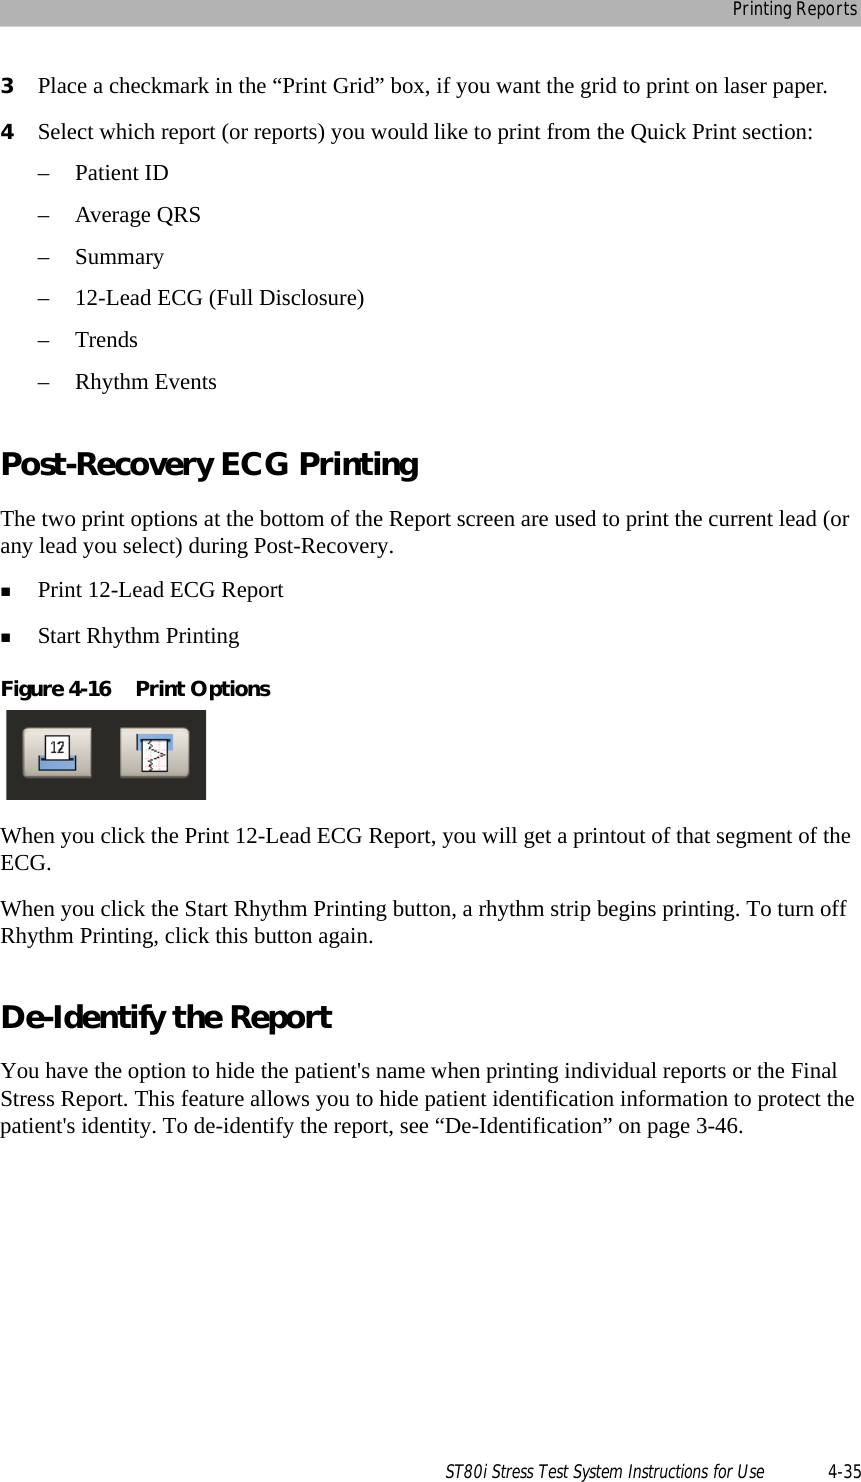 Printing ReportsST80i Stress Test System Instructions for Use 4-353Place a checkmark in the “Print Grid” box, if you want the grid to print on laser paper.4Select which report (or reports) you would like to print from the Quick Print section:– Patient ID– Average QRS–Summary– 12-Lead ECG (Full Disclosure)–Trends– Rhythm EventsPost-Recovery ECG PrintingThe two print options at the bottom of the Report screen are used to print the current lead (or any lead you select) during Post-Recovery.Print 12-Lead ECG ReportStart Rhythm PrintingFigure 4-16 Print OptionsWhen you click the Print 12-Lead ECG Report, you will get a printout of that segment of the ECG.When you click the Start Rhythm Printing button, a rhythm strip begins printing. To turn off Rhythm Printing, click this button again.De-Identify the ReportYou have the option to hide the patient&apos;s name when printing individual reports or the Final Stress Report. This feature allows you to hide patient identification information to protect the patient&apos;s identity. To de-identify the report, see “De-Identification” on page 3-46.